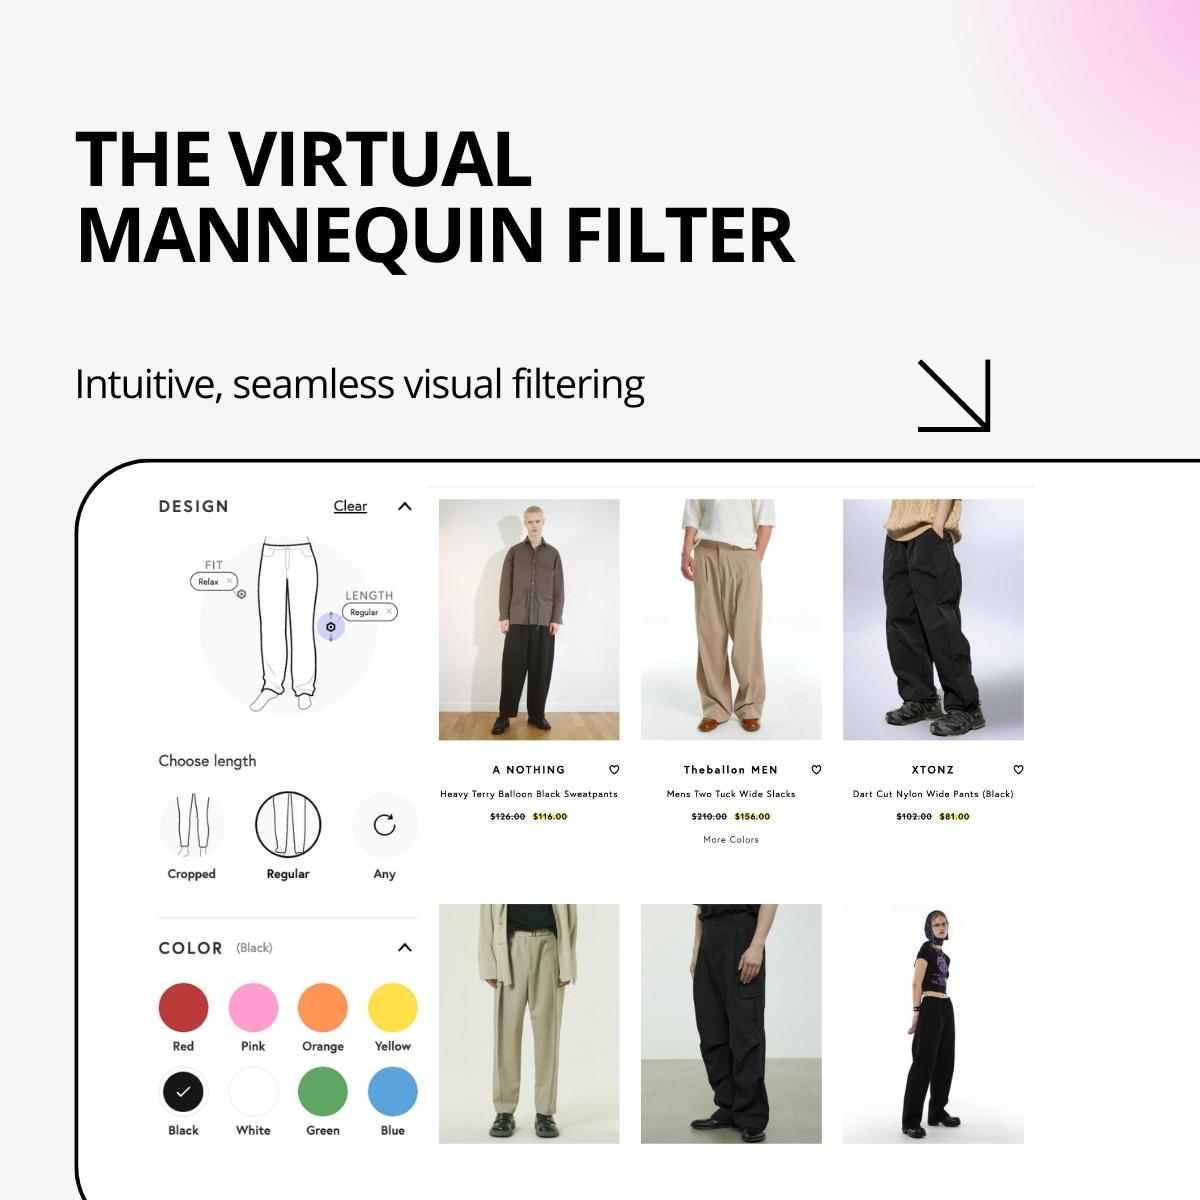 Virtual Mannequin Filter against a pink gradient background